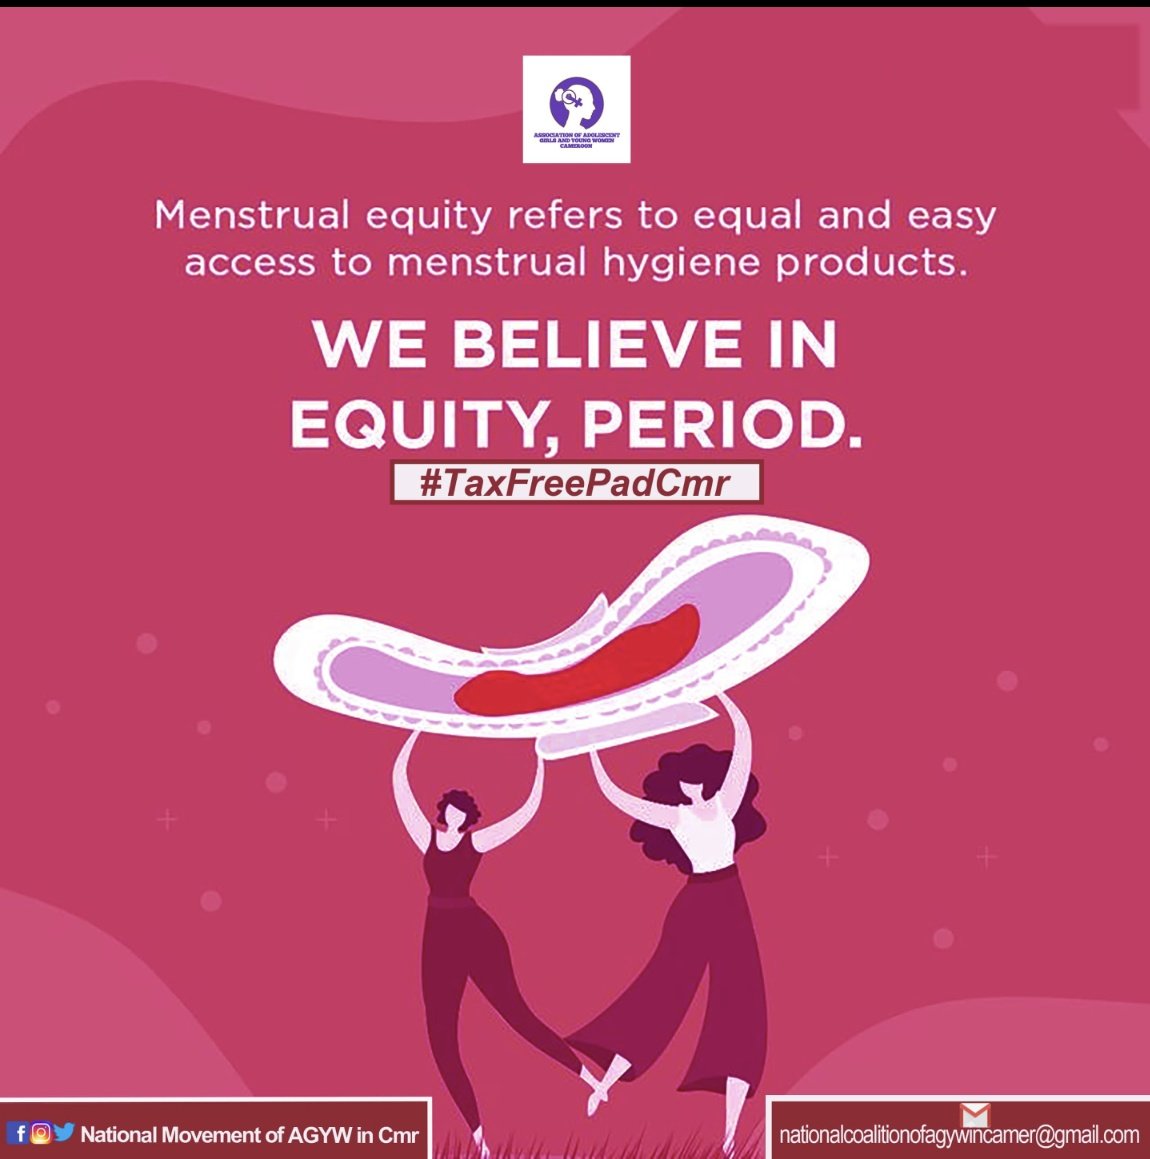 Period equity means that everyone has equal access to menstrual products, education, and healthcare. It's a matter of justice and human rights.
#PeriodEquity #MenstrualEquity #EndPeriodStigma
#periodfriendlyworld #mhmatters 

#taxfreepadcmr 
#Donttaxmyperiod
#Donttaxmyblood